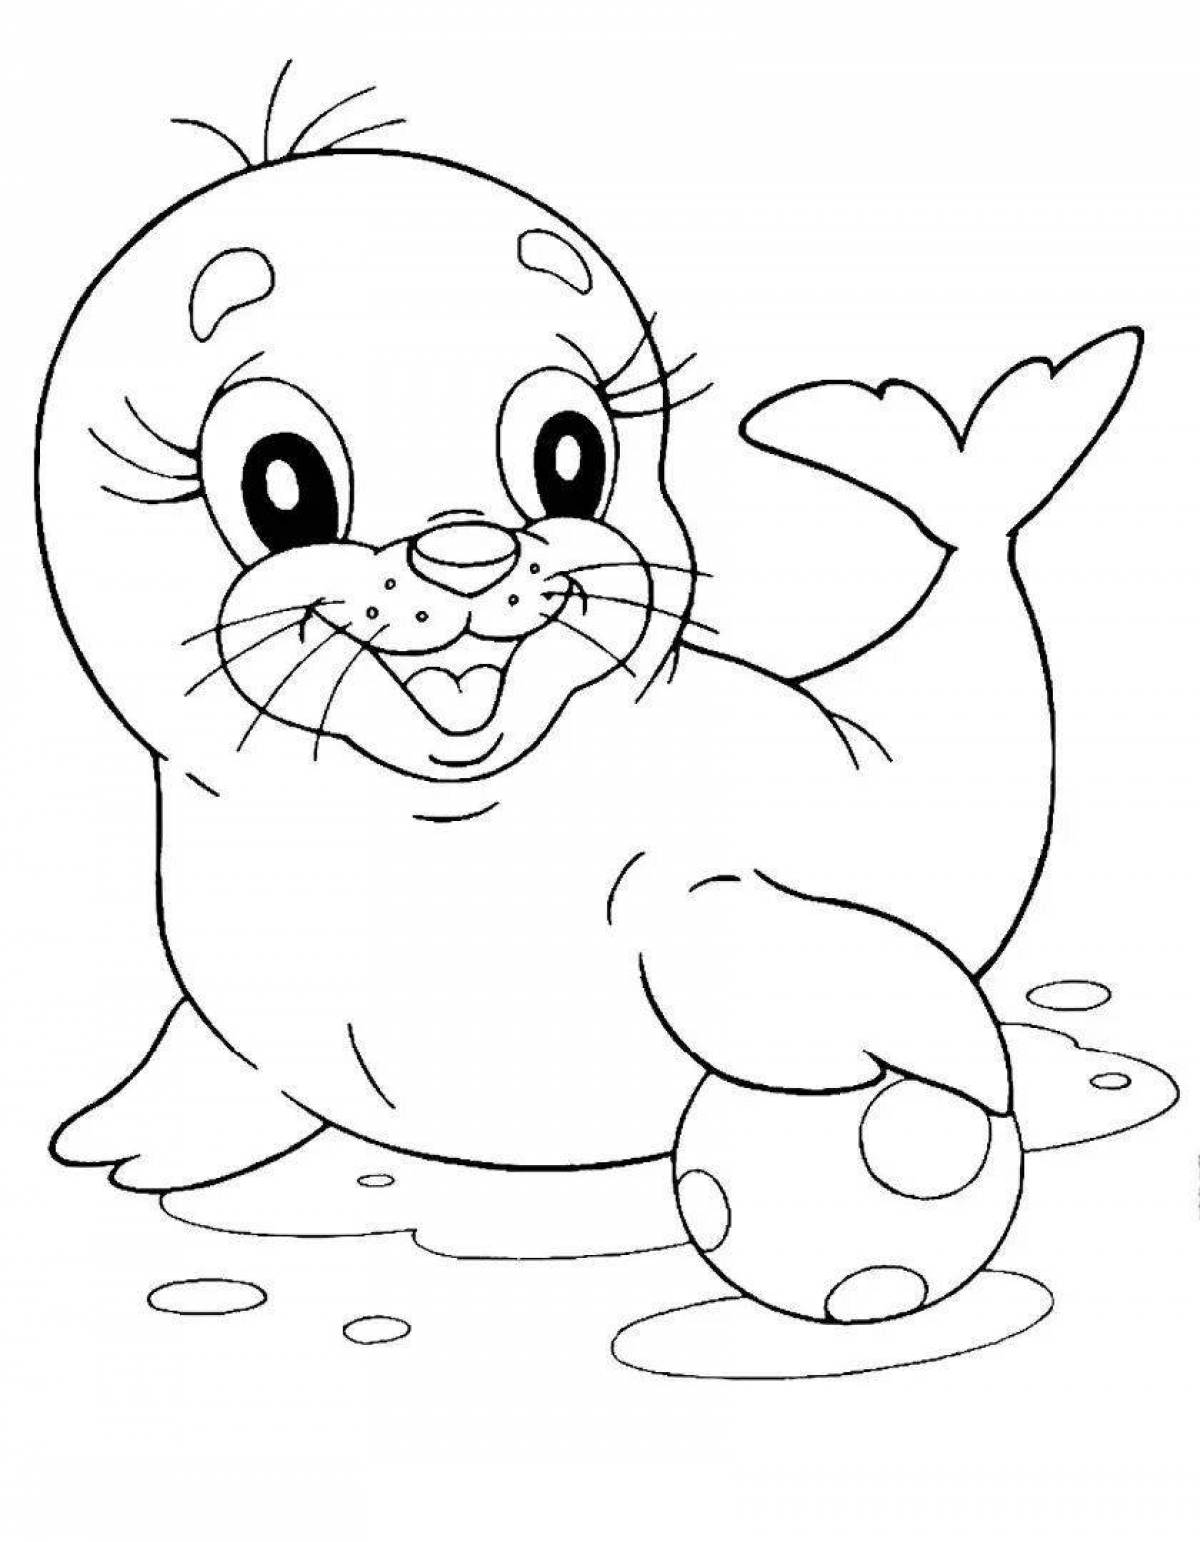 Witty fur seal coloring book for kids